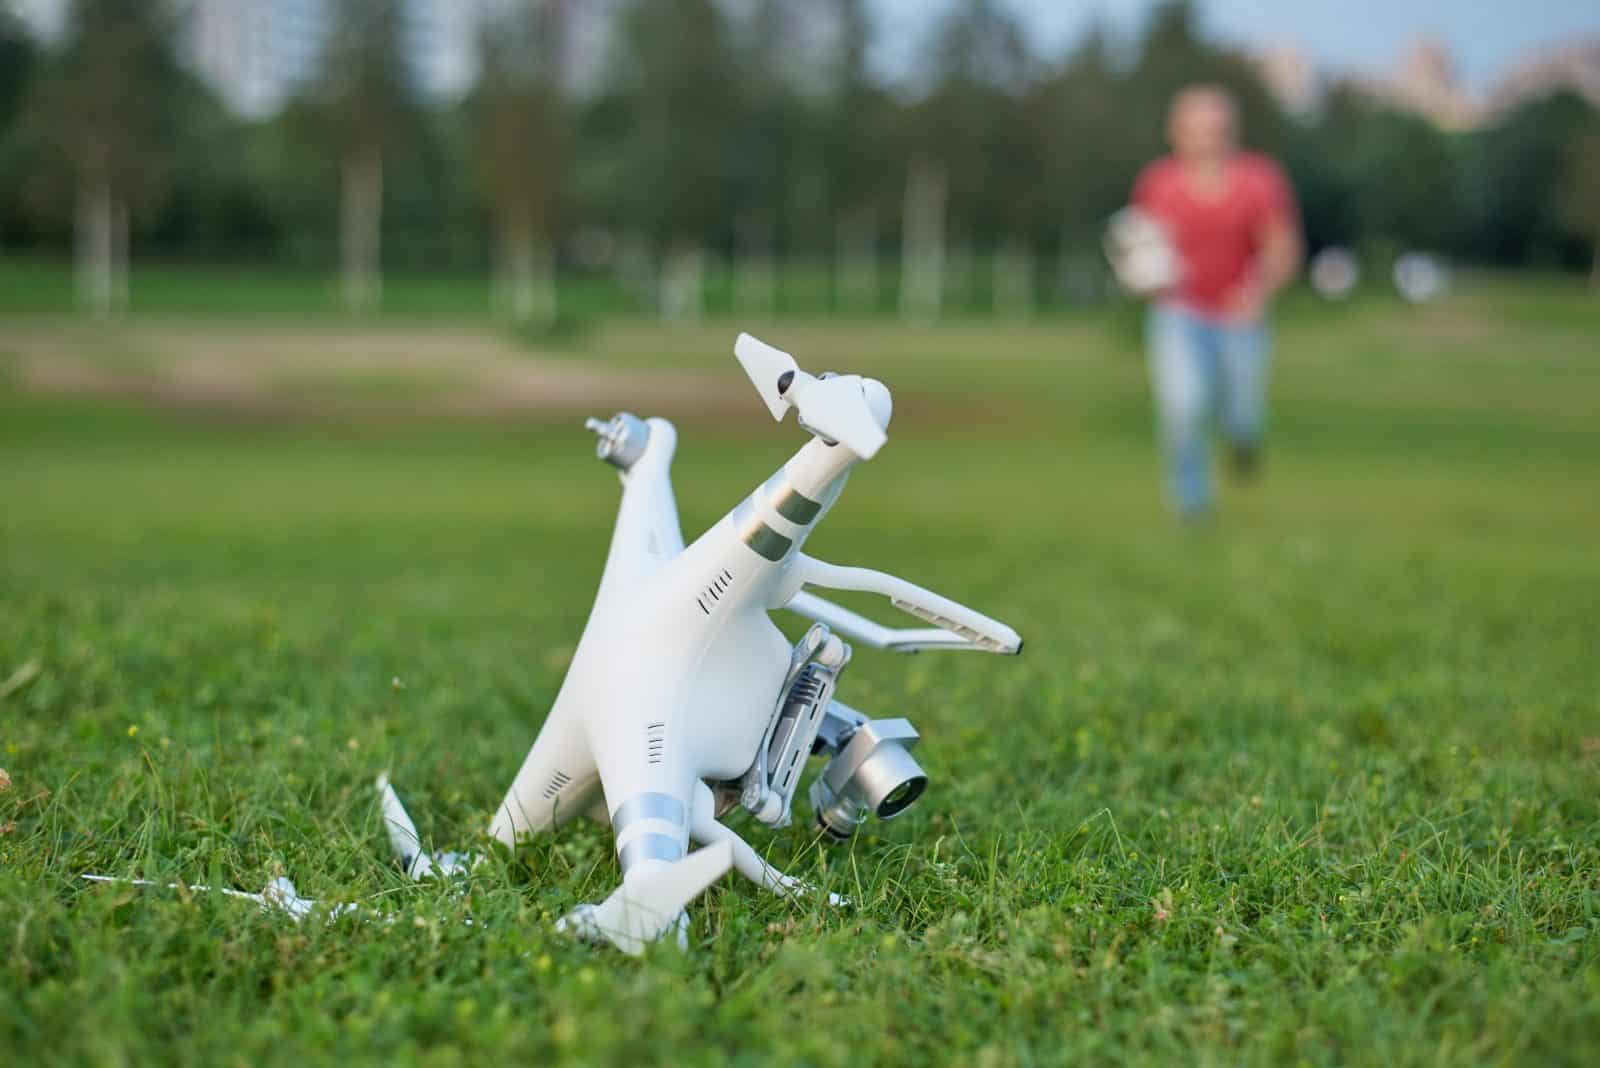 UAV Crash: What to Do in Case of a Drone Accident - dronegenuity